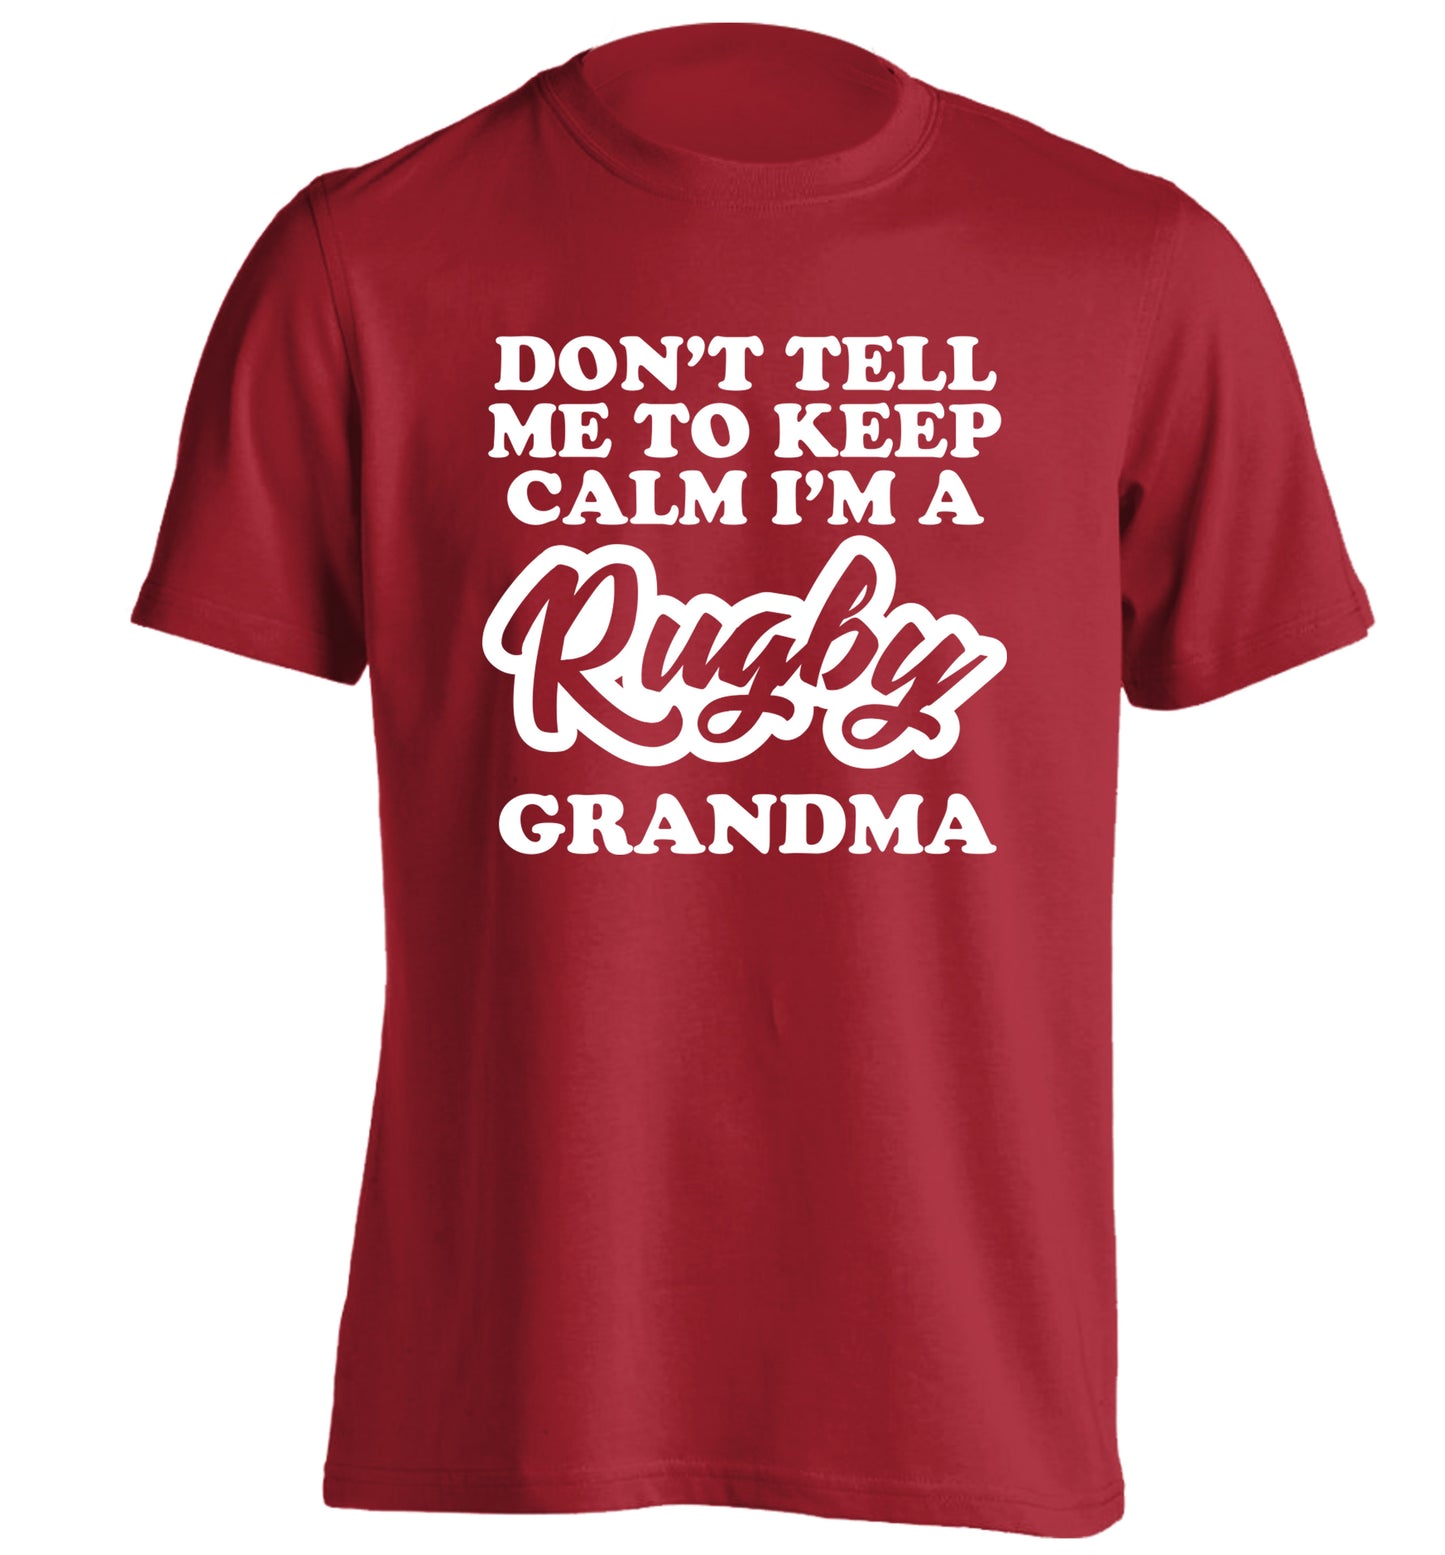 Don't tell me to keep calm I'm a rugby grandma adults unisex red Tshirt 2XL